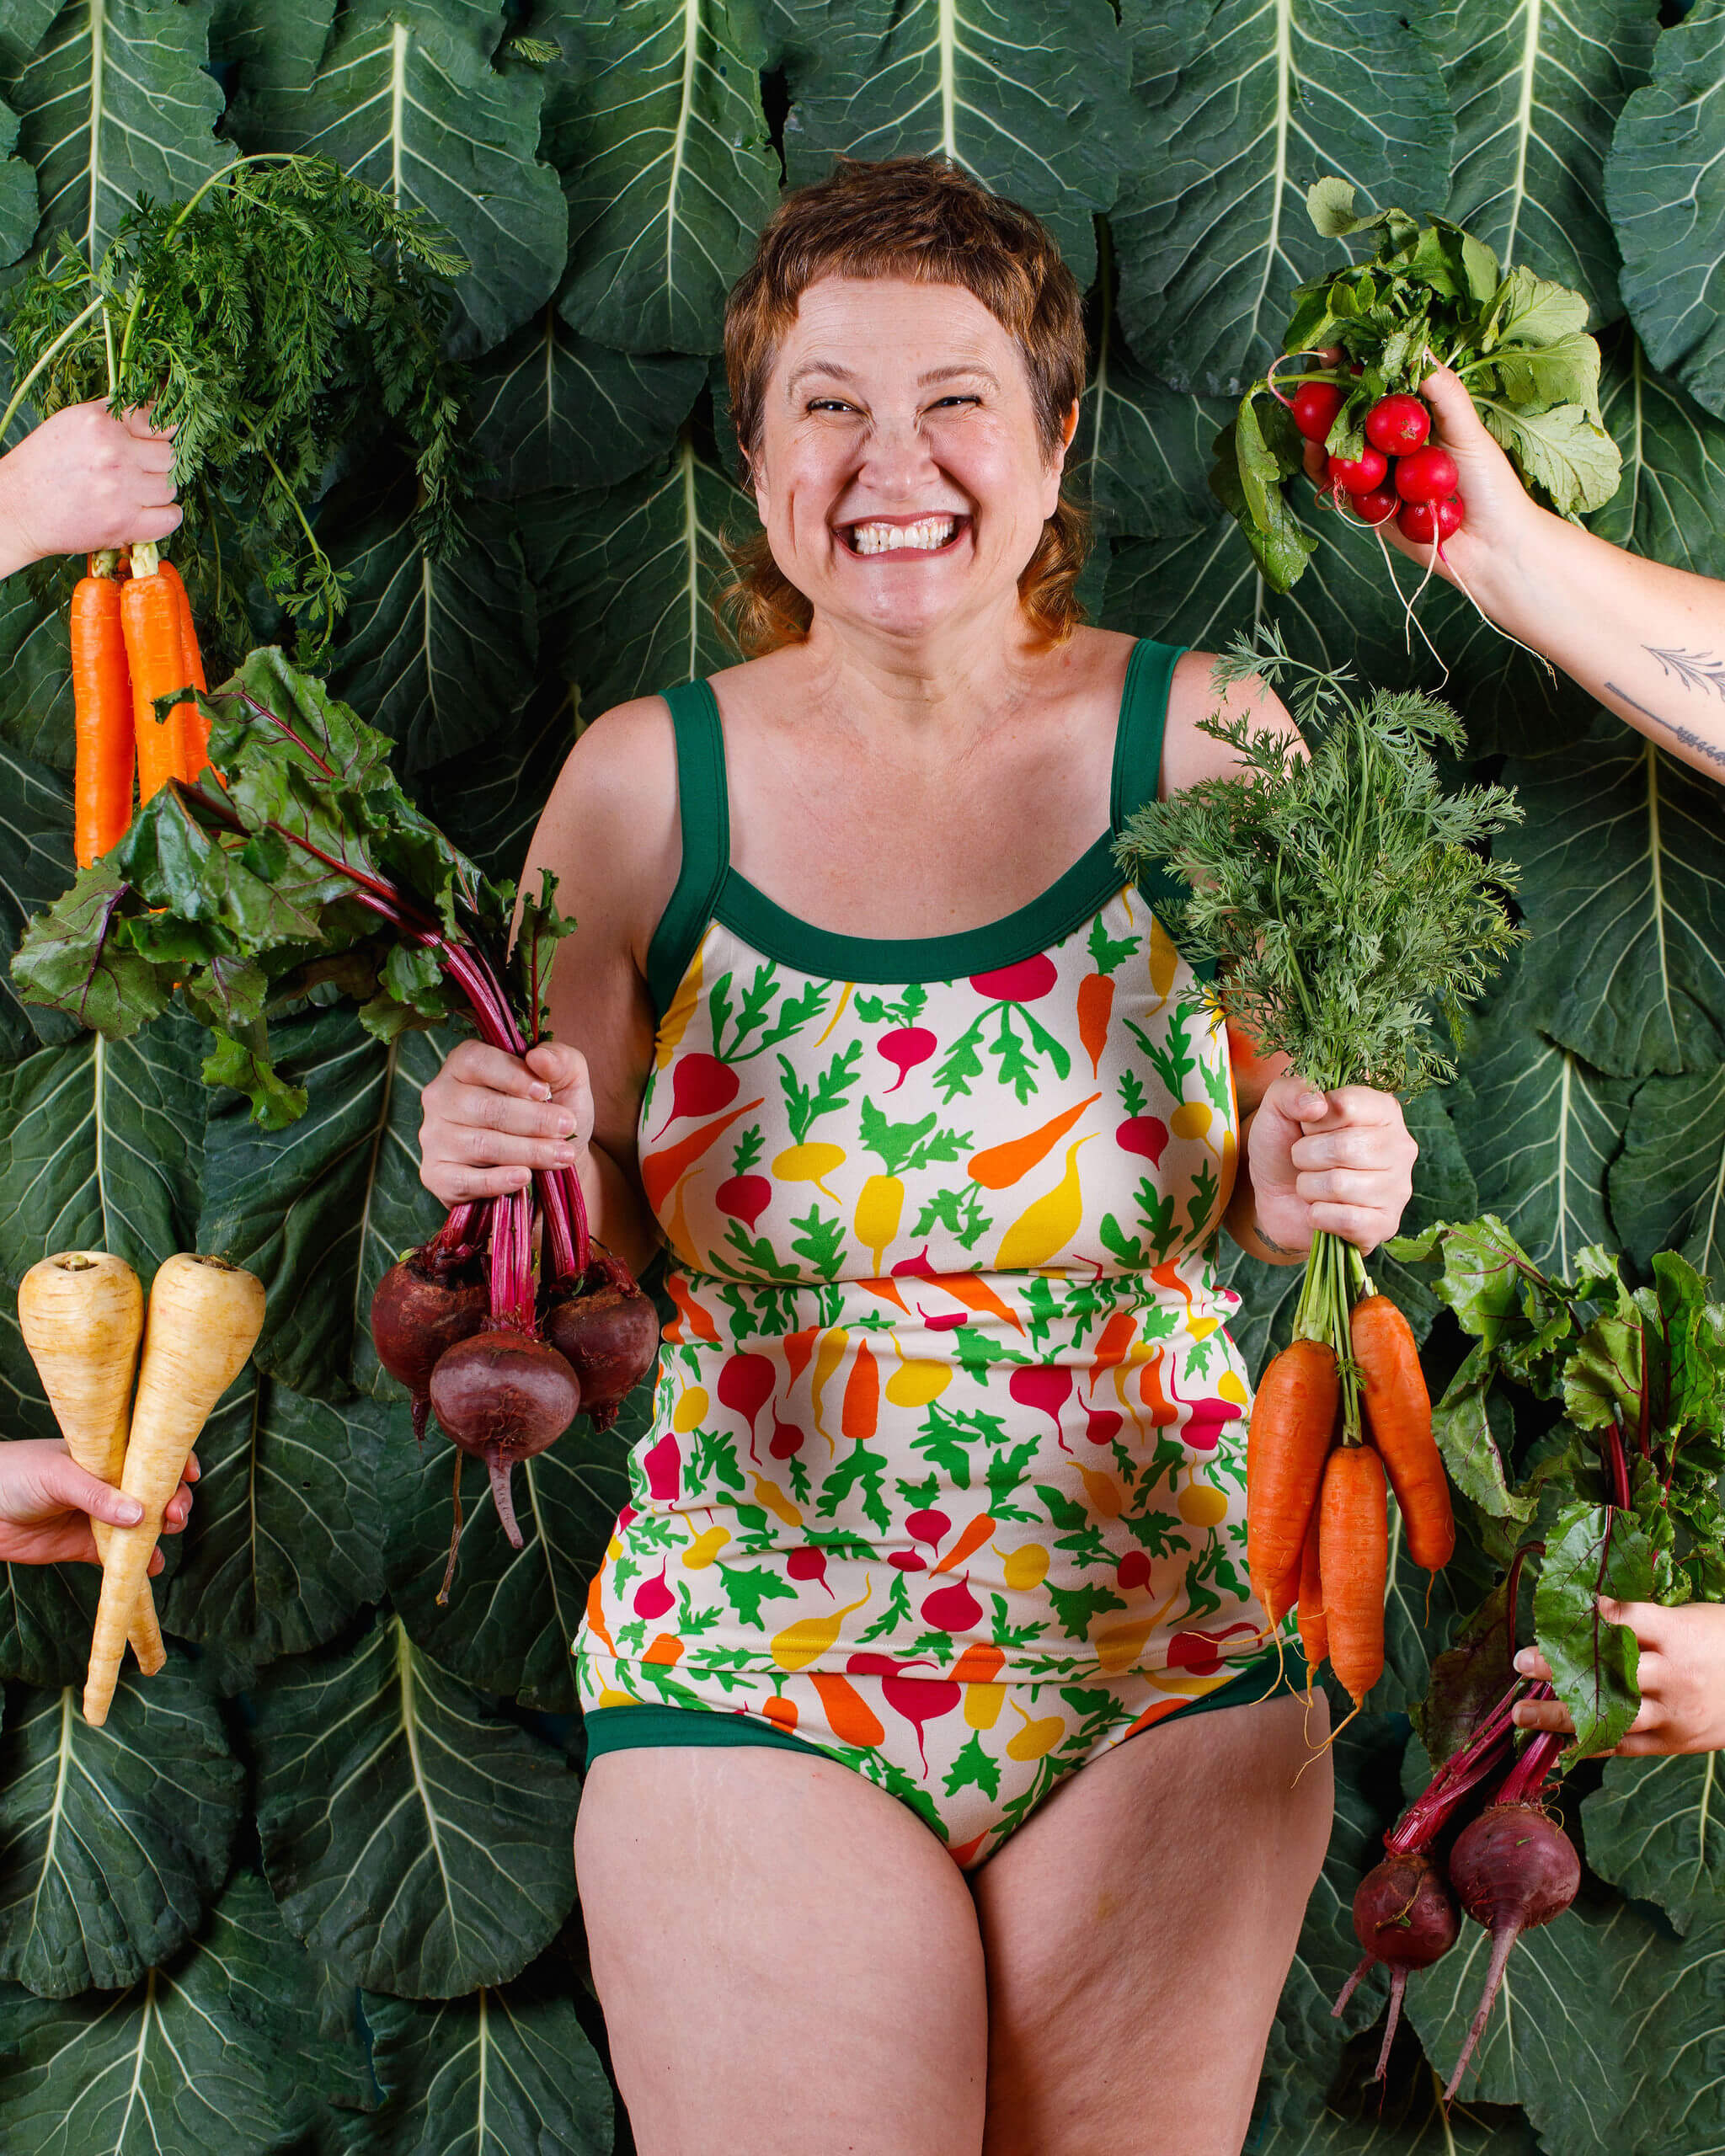 Model smiling big while wearing Thunderpants Camisole and Hipster style underwear in Root Veggies print and surrounded by root veggies.